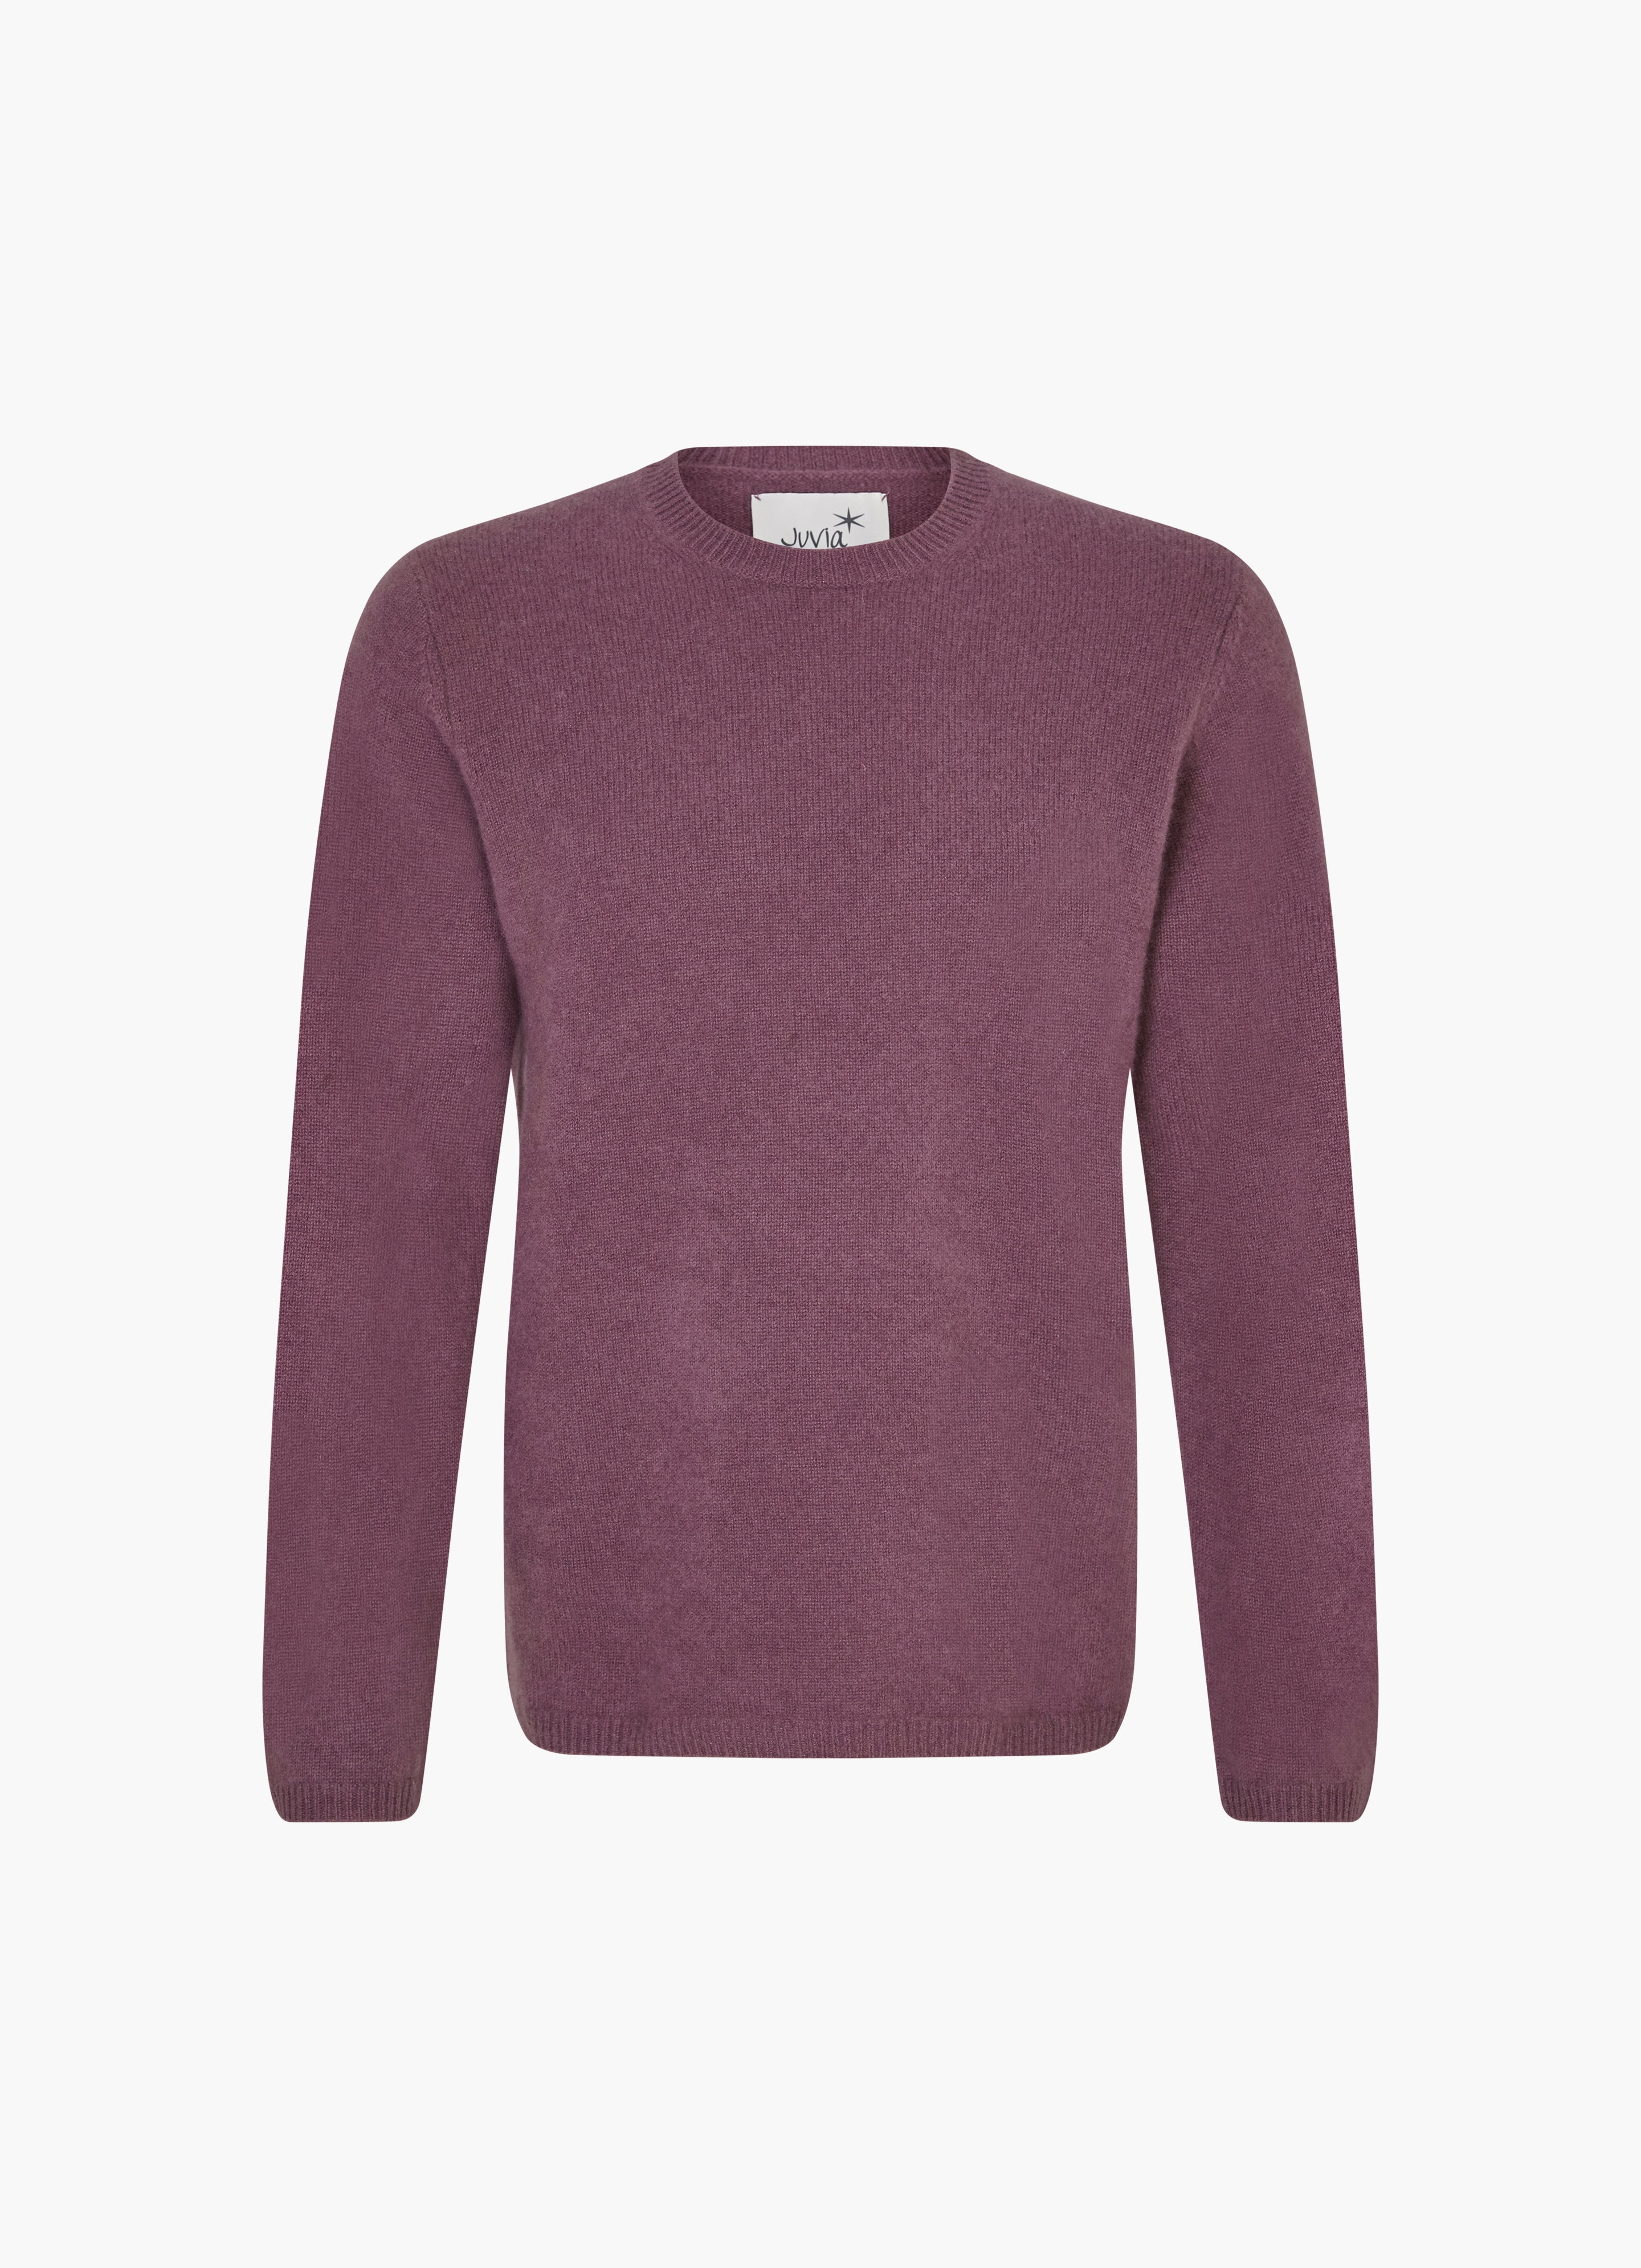 Boiled Cashmere Sweater